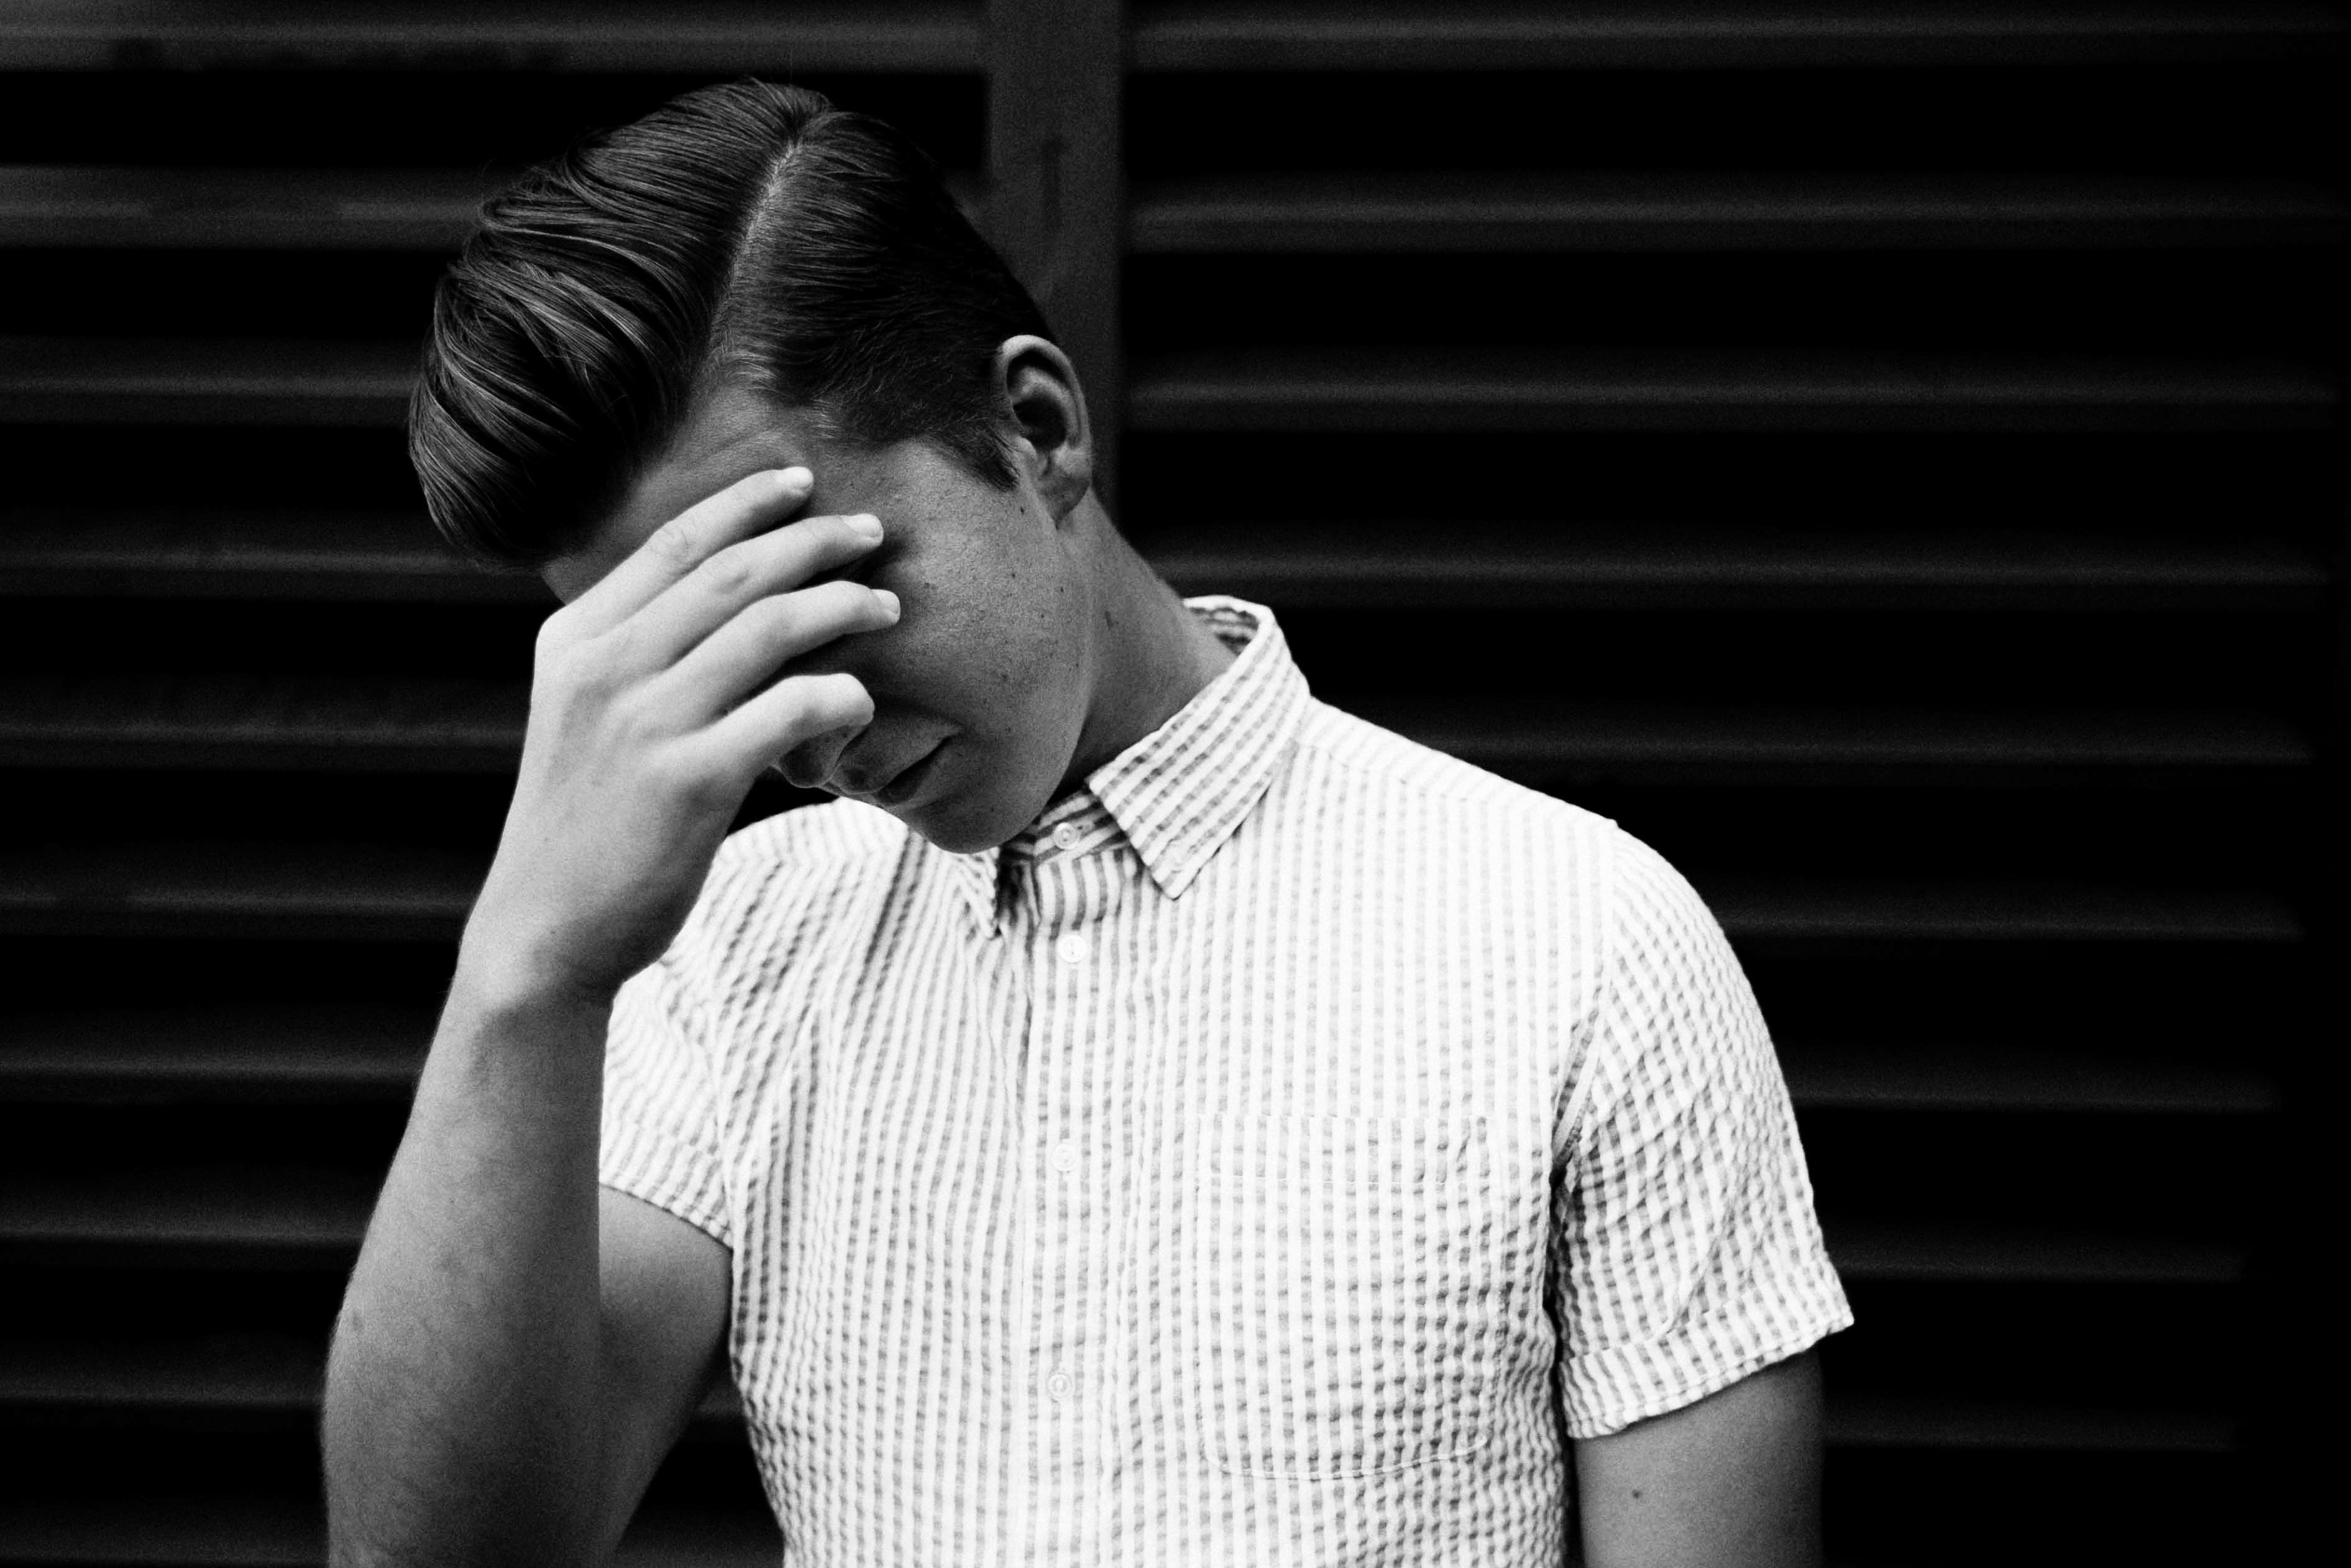 man in collared shirt with face palm in grayscale photo